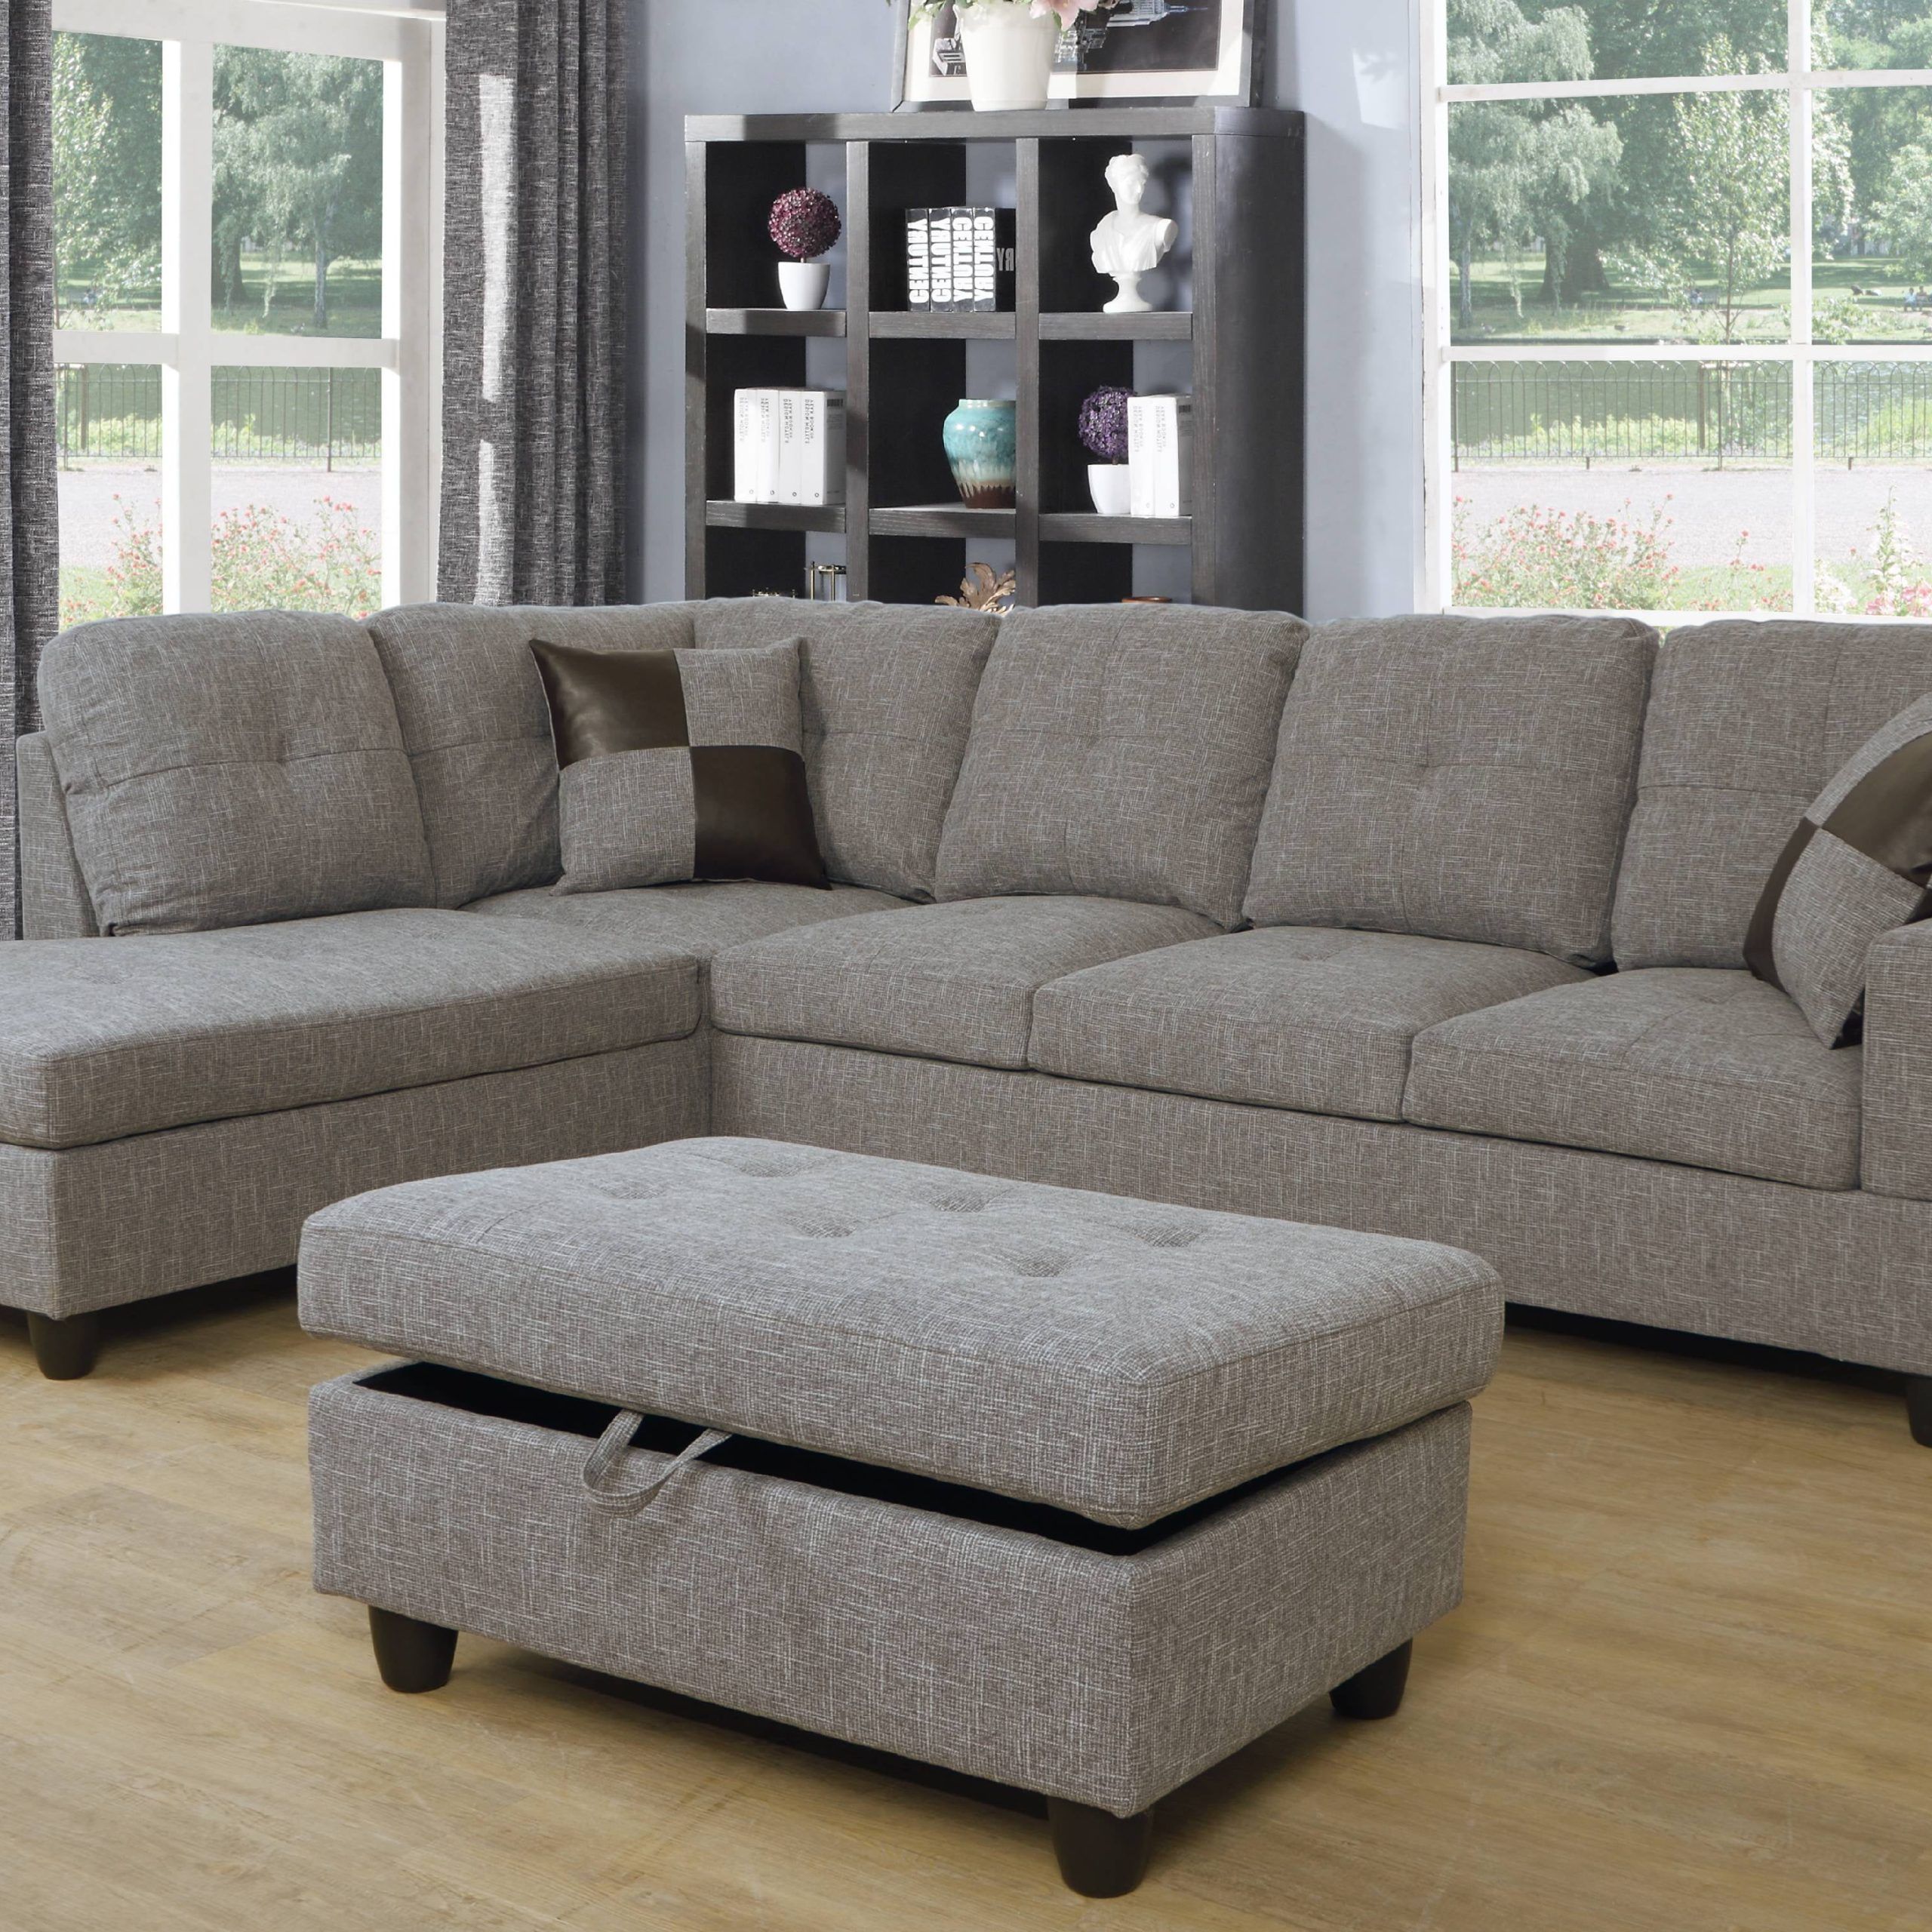 Ponliving Furniture_l Shape Sectional Sofa Set With Storage Ottoman Regarding Sofas With Ottomans In Brown (Gallery 19 of 20)